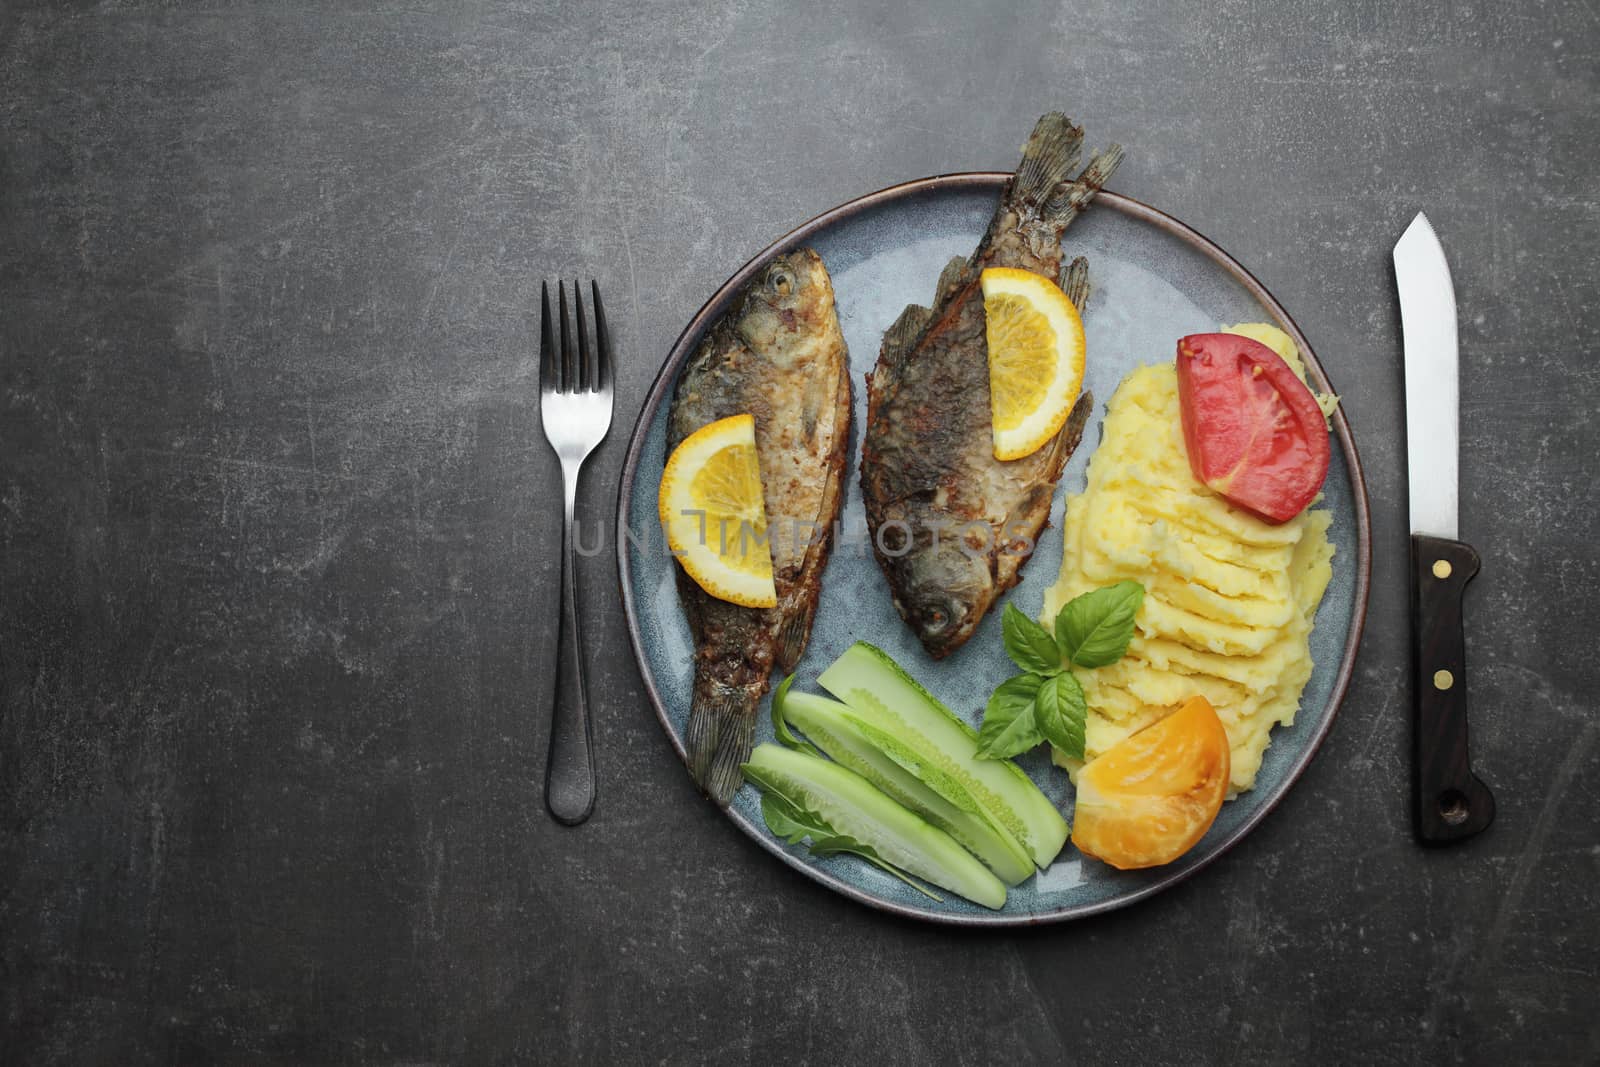 Fried fish and vegetables on a plate. Concrete gray countertop. High quality photo